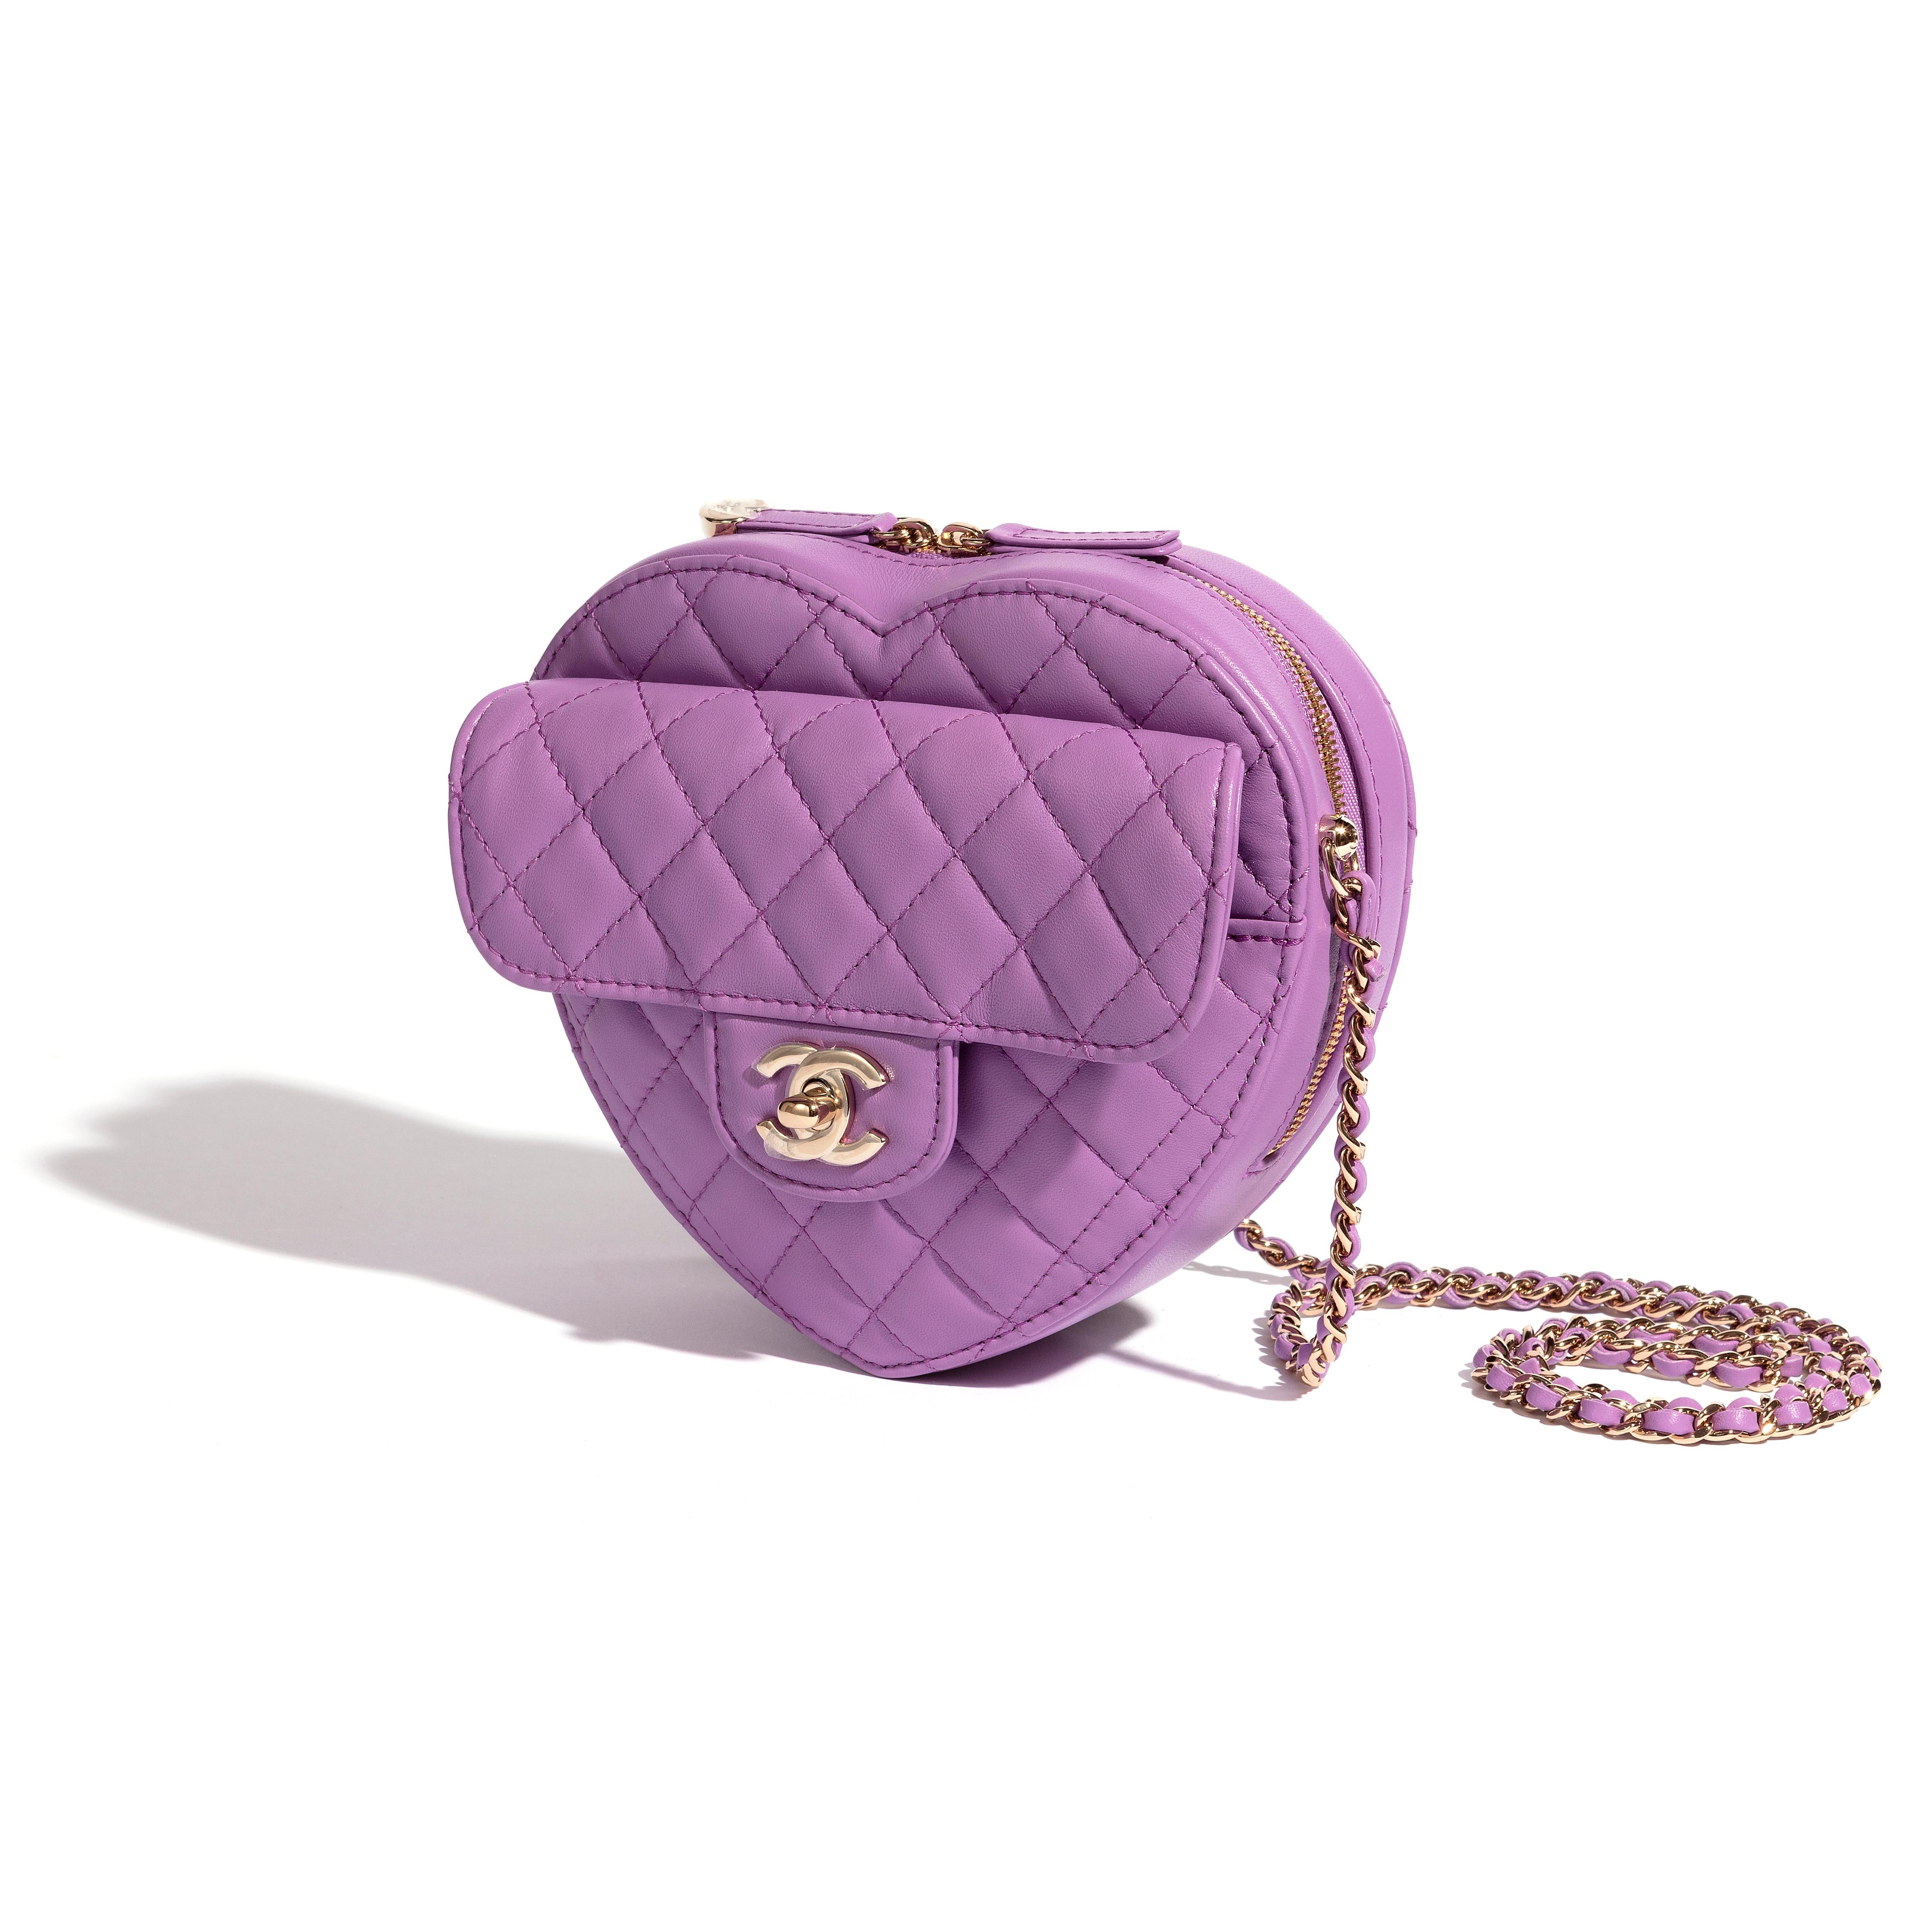 A coveted lilac Chanel Heart Bag. The exterior of this Heart Bag is crafted with lilac lambskin leather in the signature diamond style stitching with silver-tone hardware and has a signature logo zipper pull. It features a front flap with signature